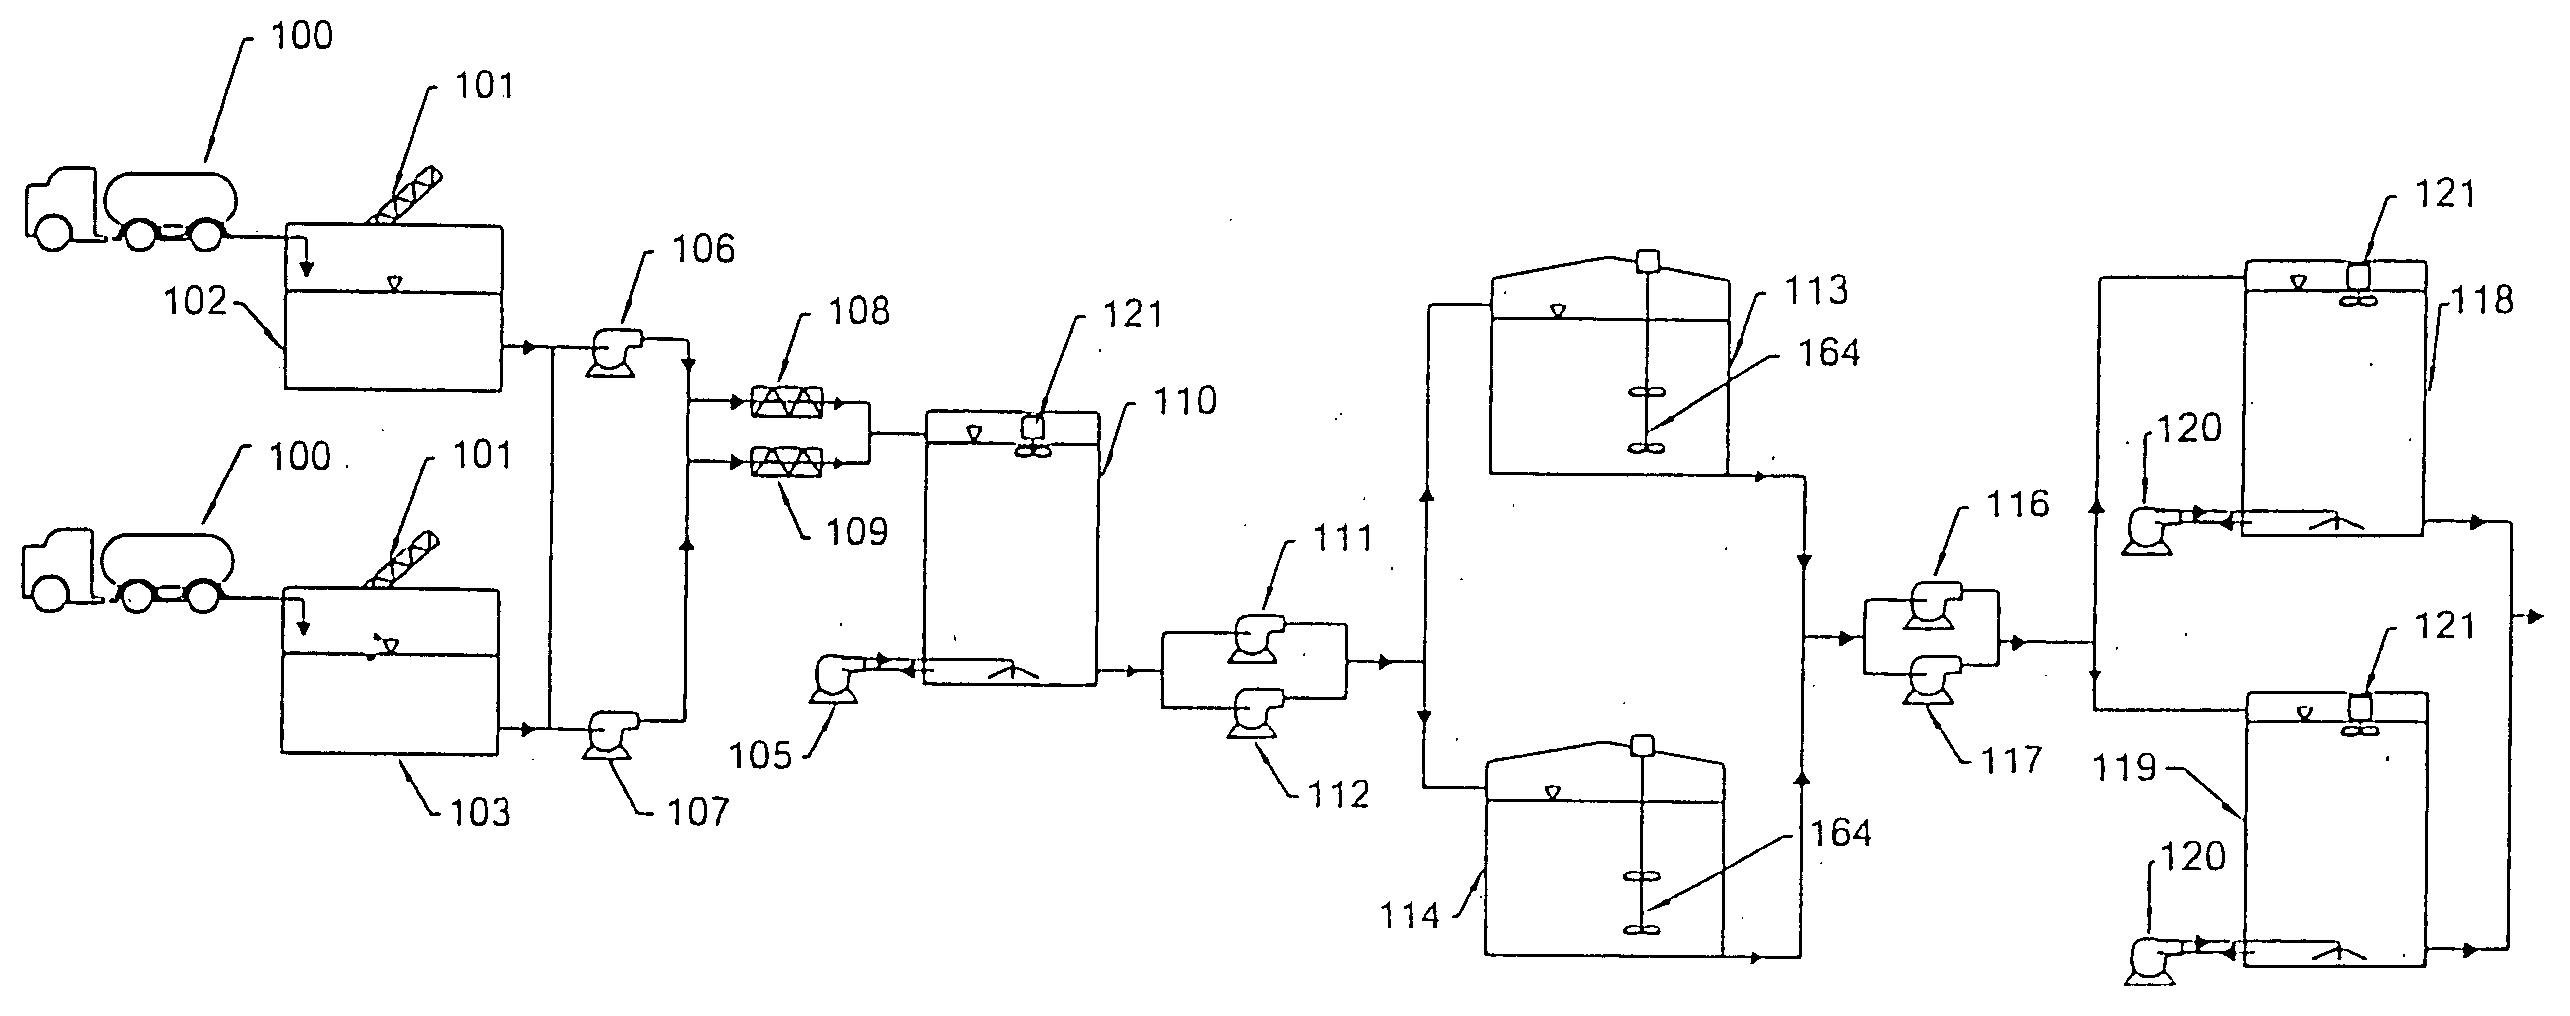 Process for treating septage to extract a bio-fuel